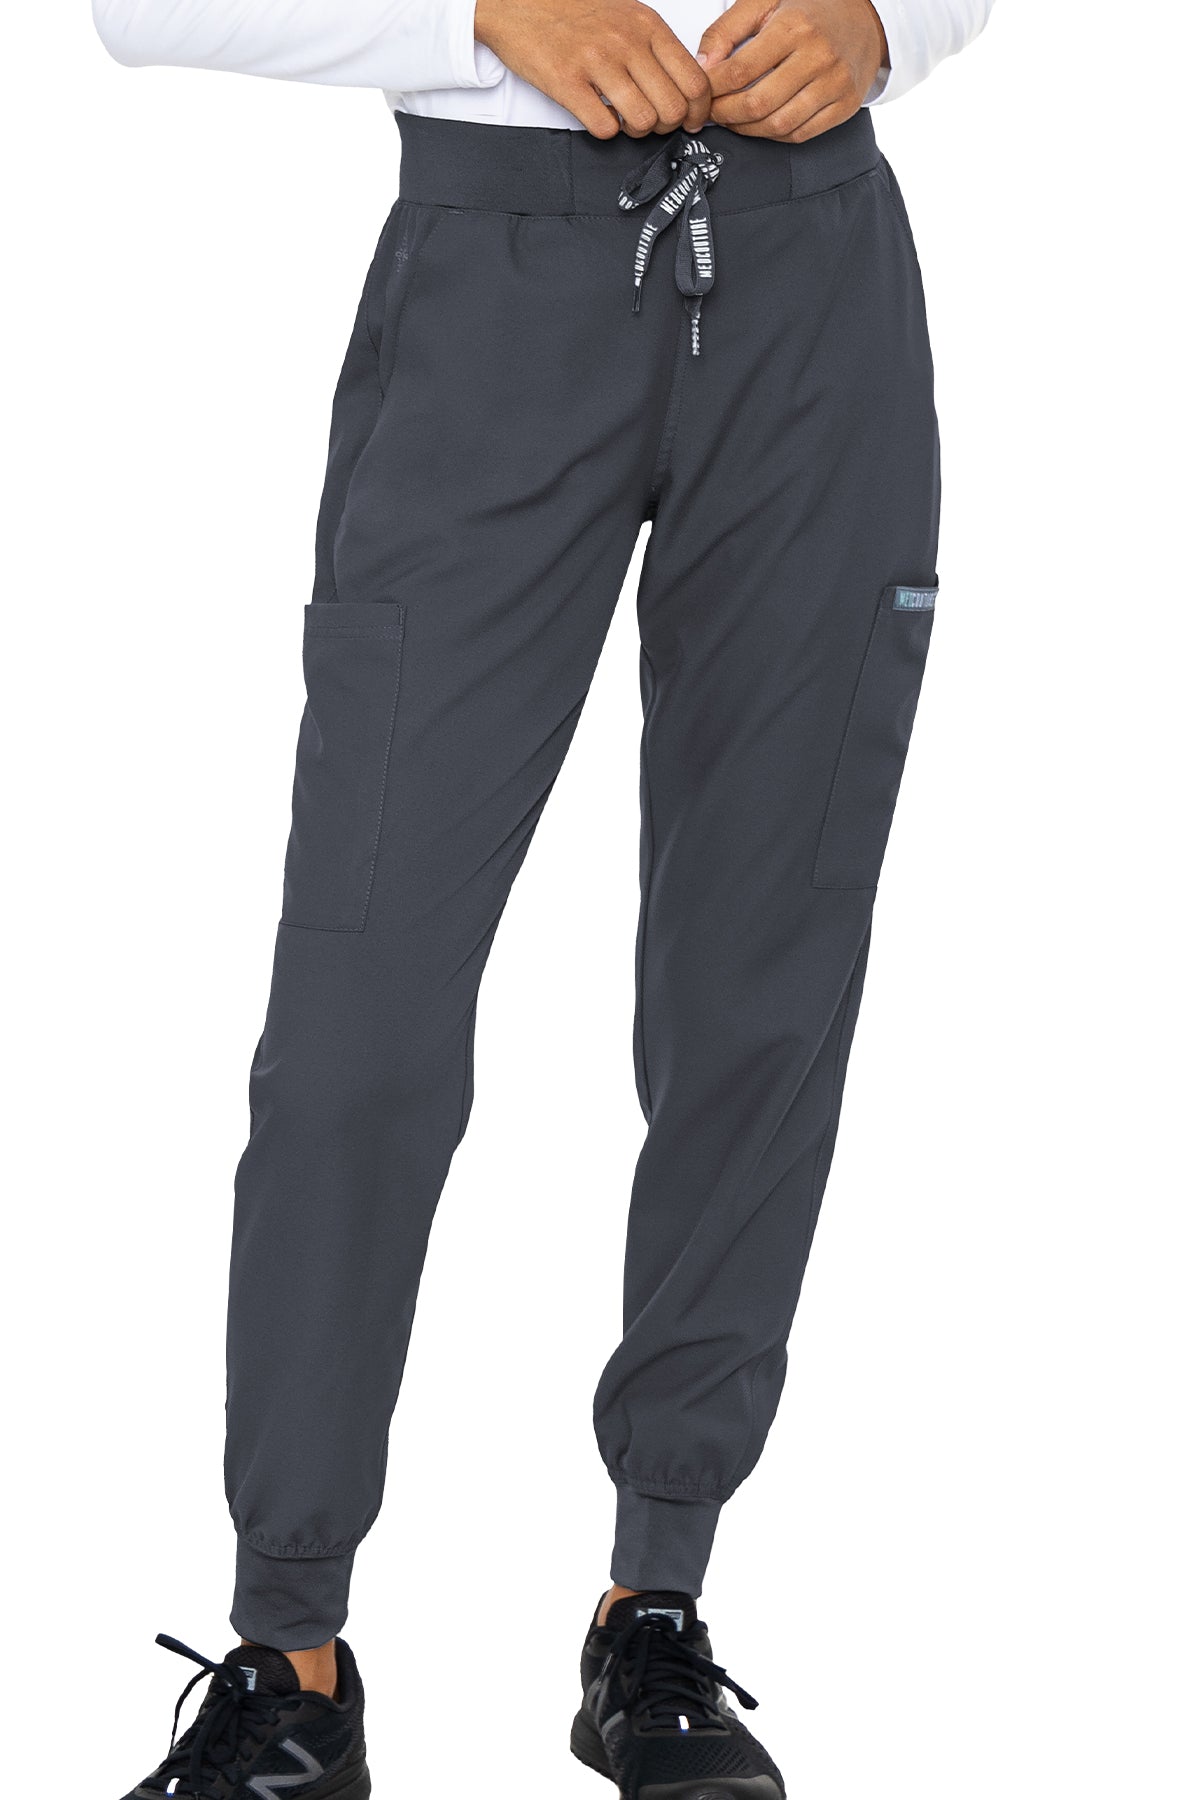 Med Couture Scrub Pants Insight Jogger Pant in Pewter at Parker's Clothing and Shoes.